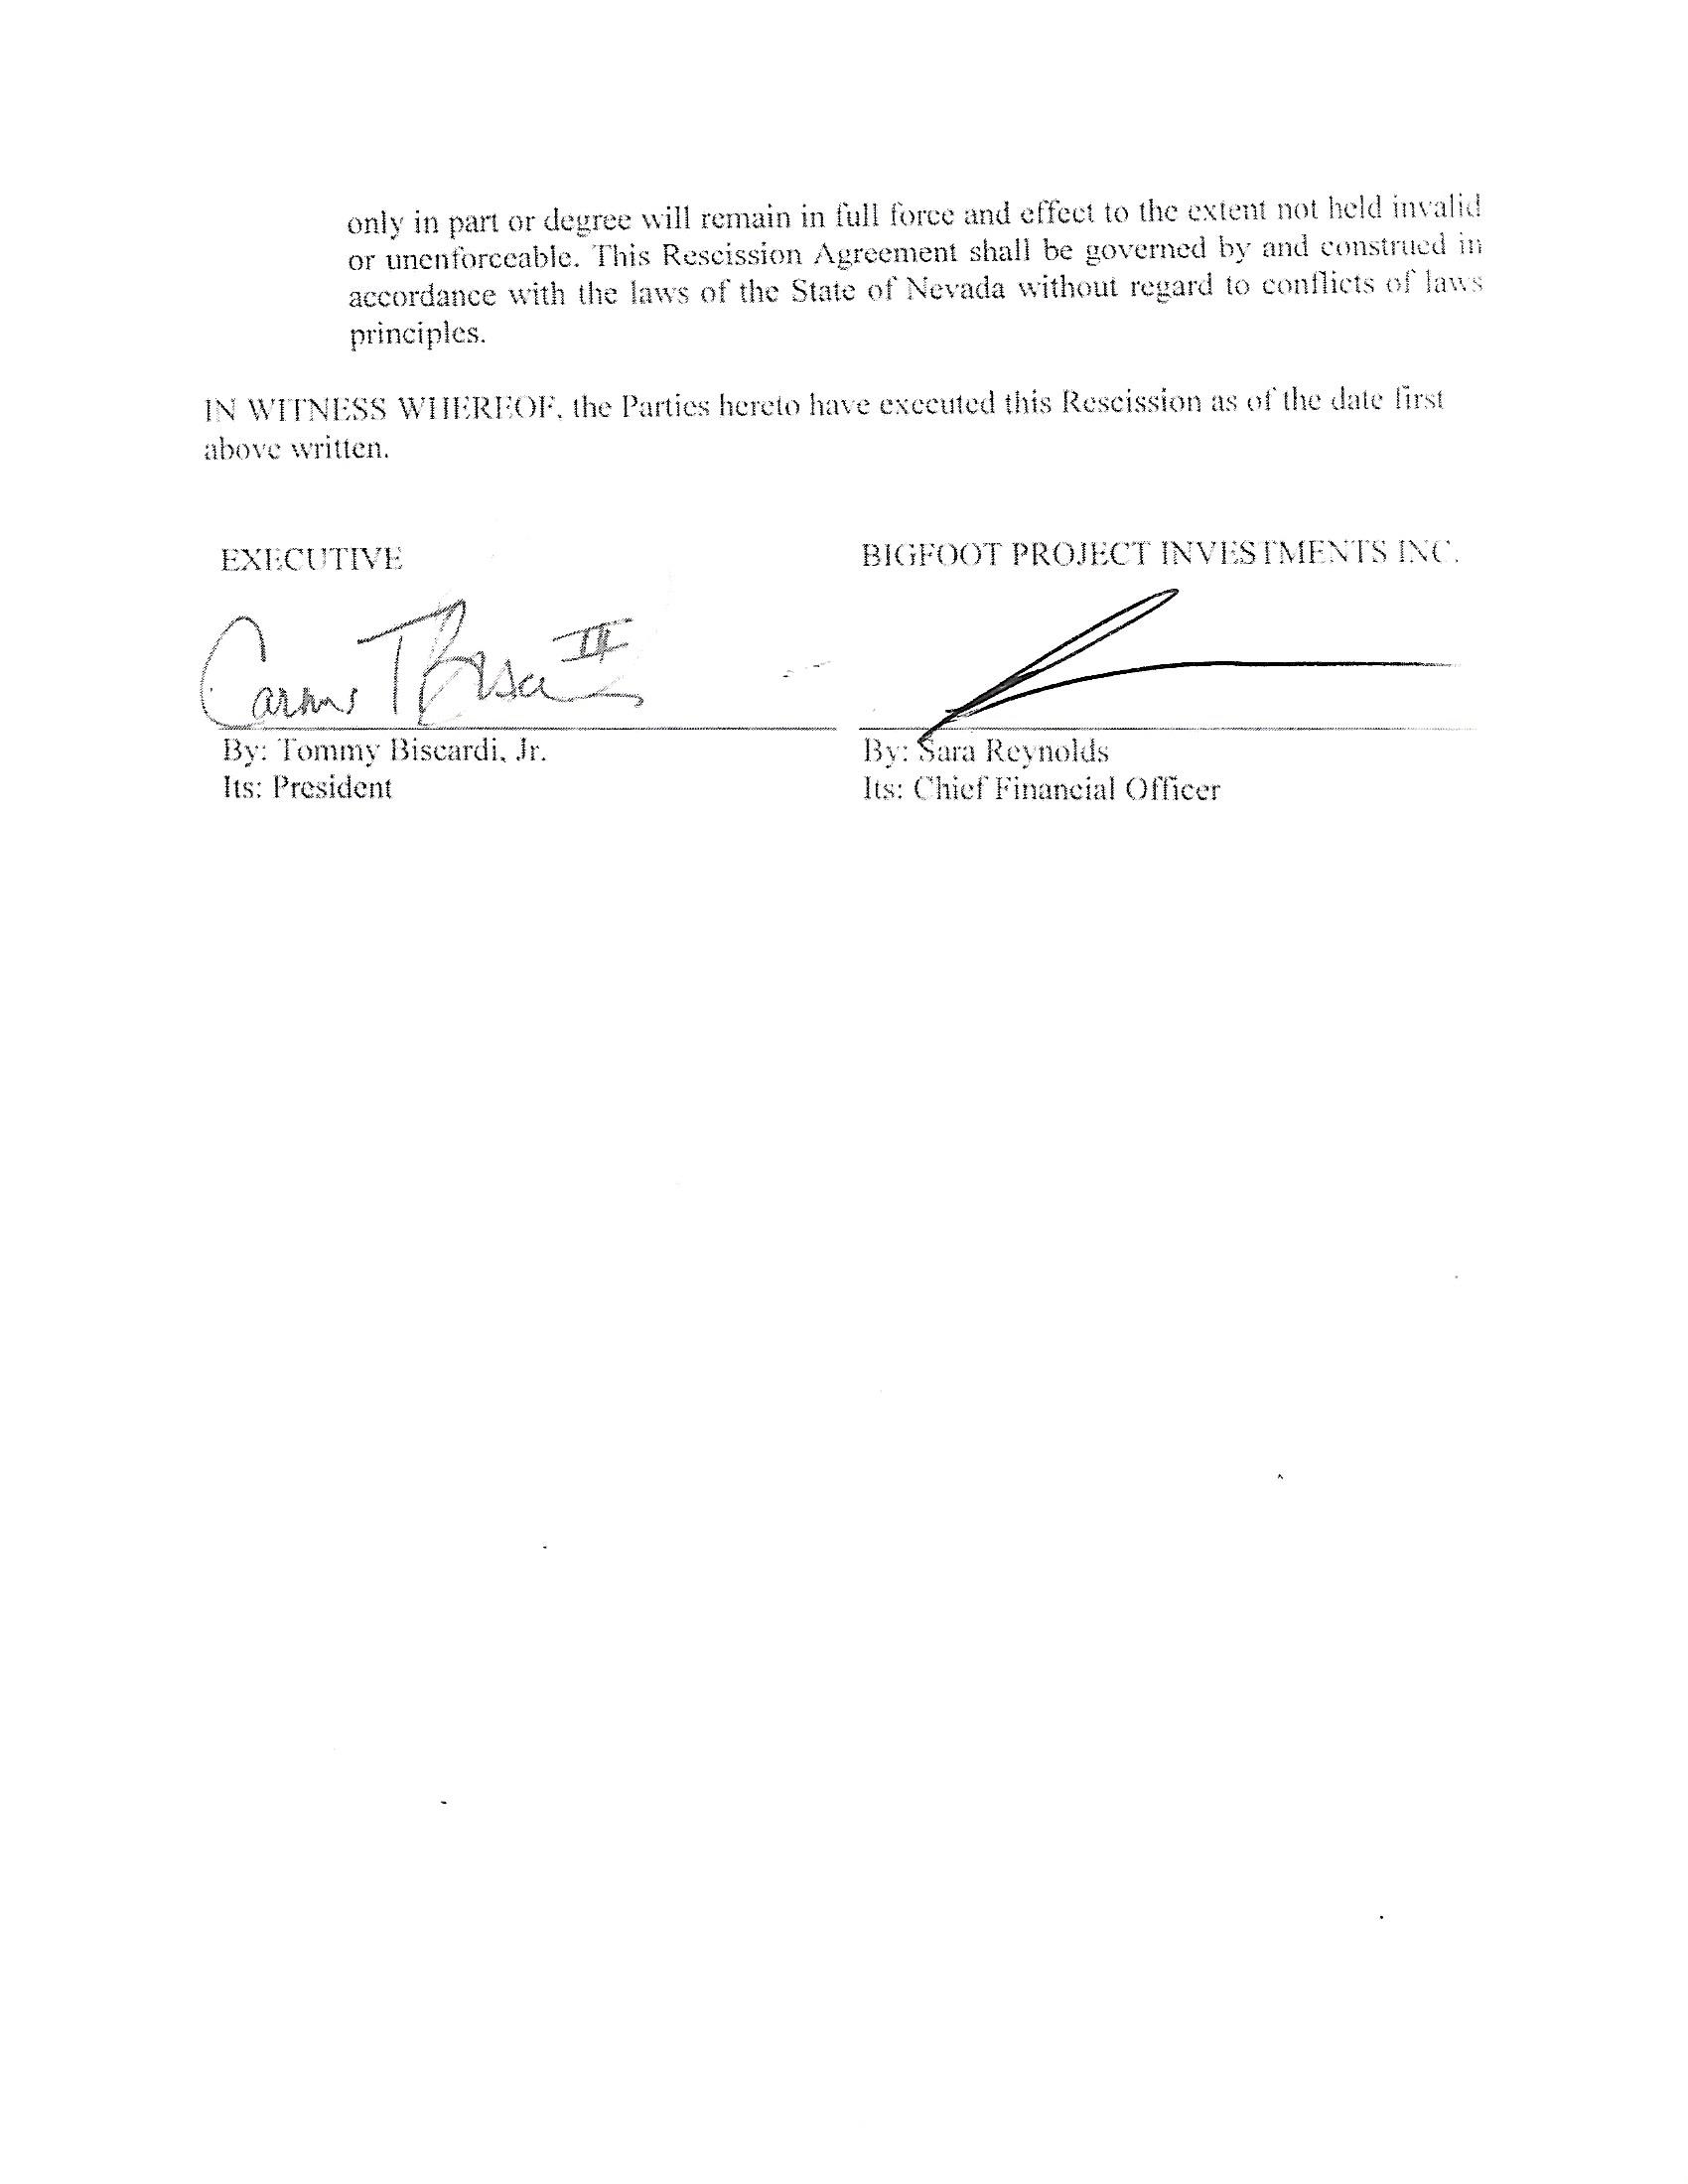 Restricted Stock Award Rescission Agreement_Tommy Biscardi.102_Page_3.jpg